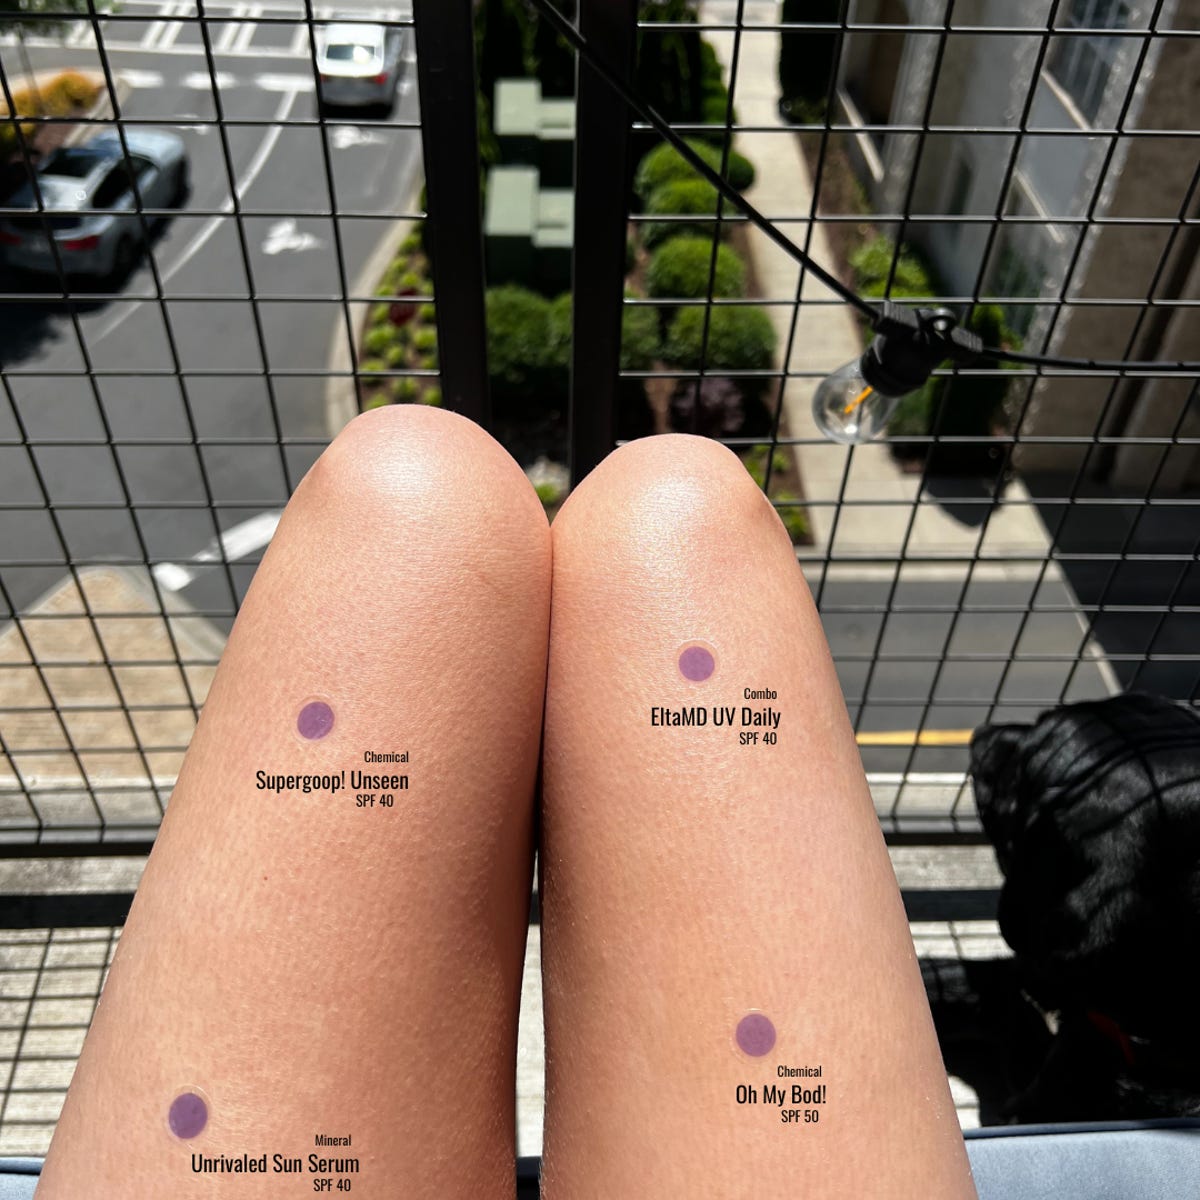 Four sun stickers on upper legs. Each is labeled with the sunscreen brand and SPF